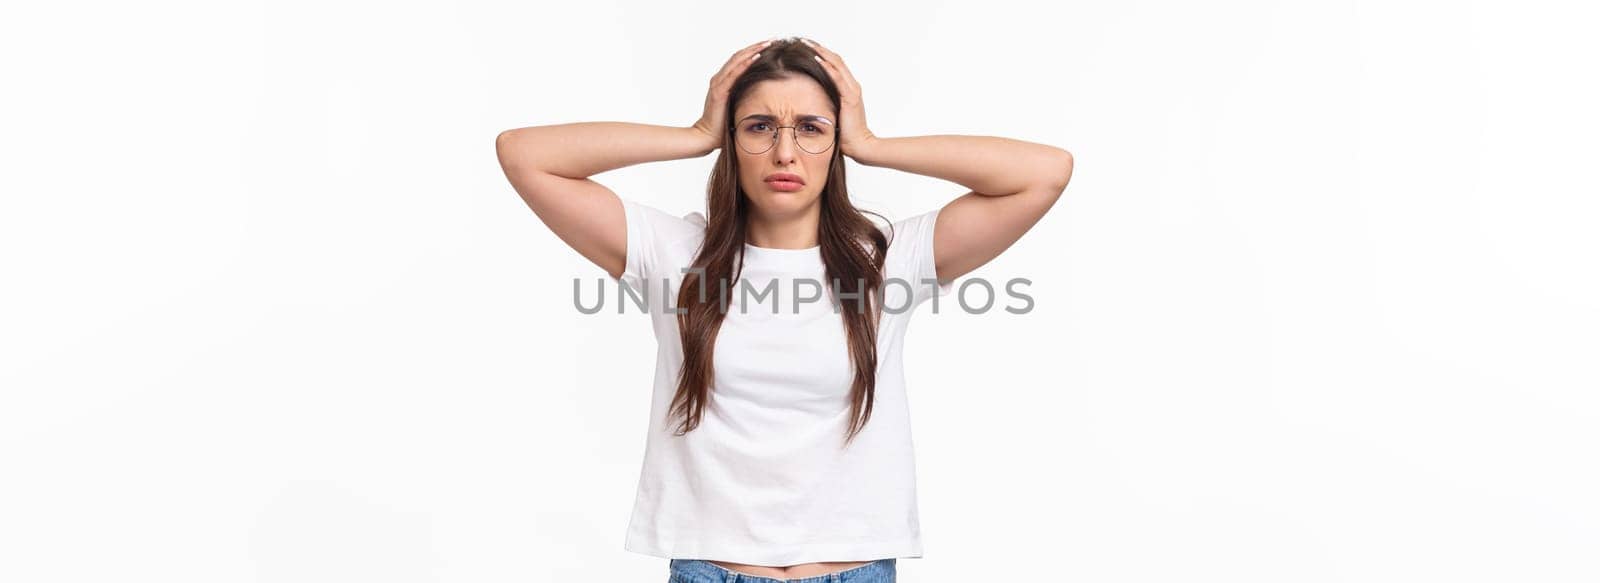 Waist-up portrait of troubled female student have big problem, grab head frowning and grimacing facing complex situation, dont know what do, standing desperate and embarrassed.